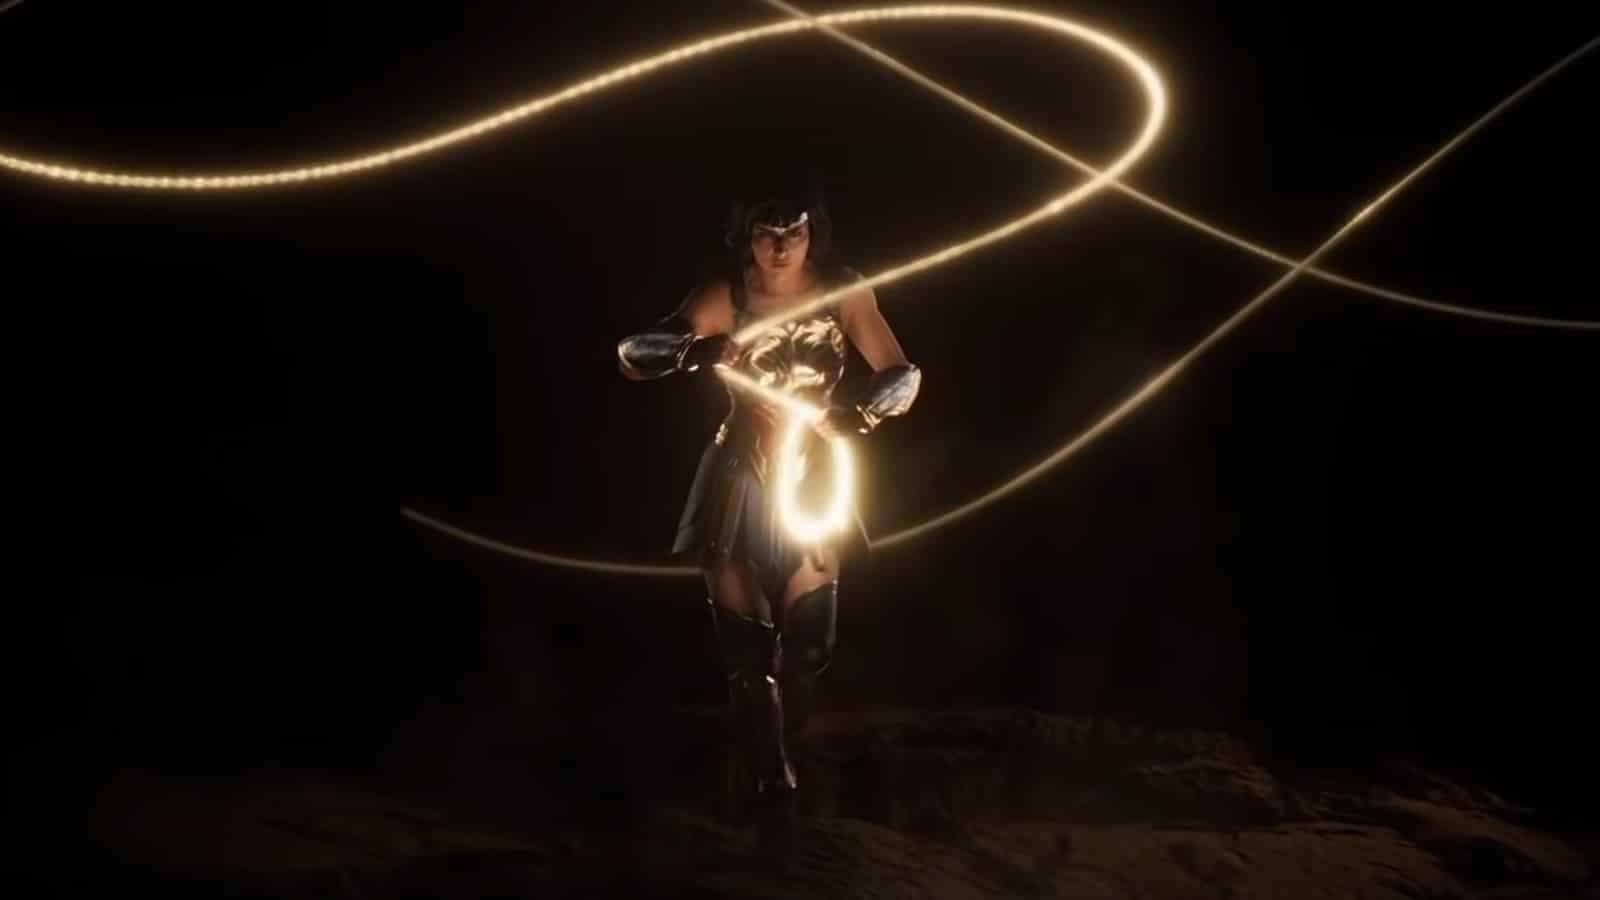 Wonder Woman Video Game: Everything We Know